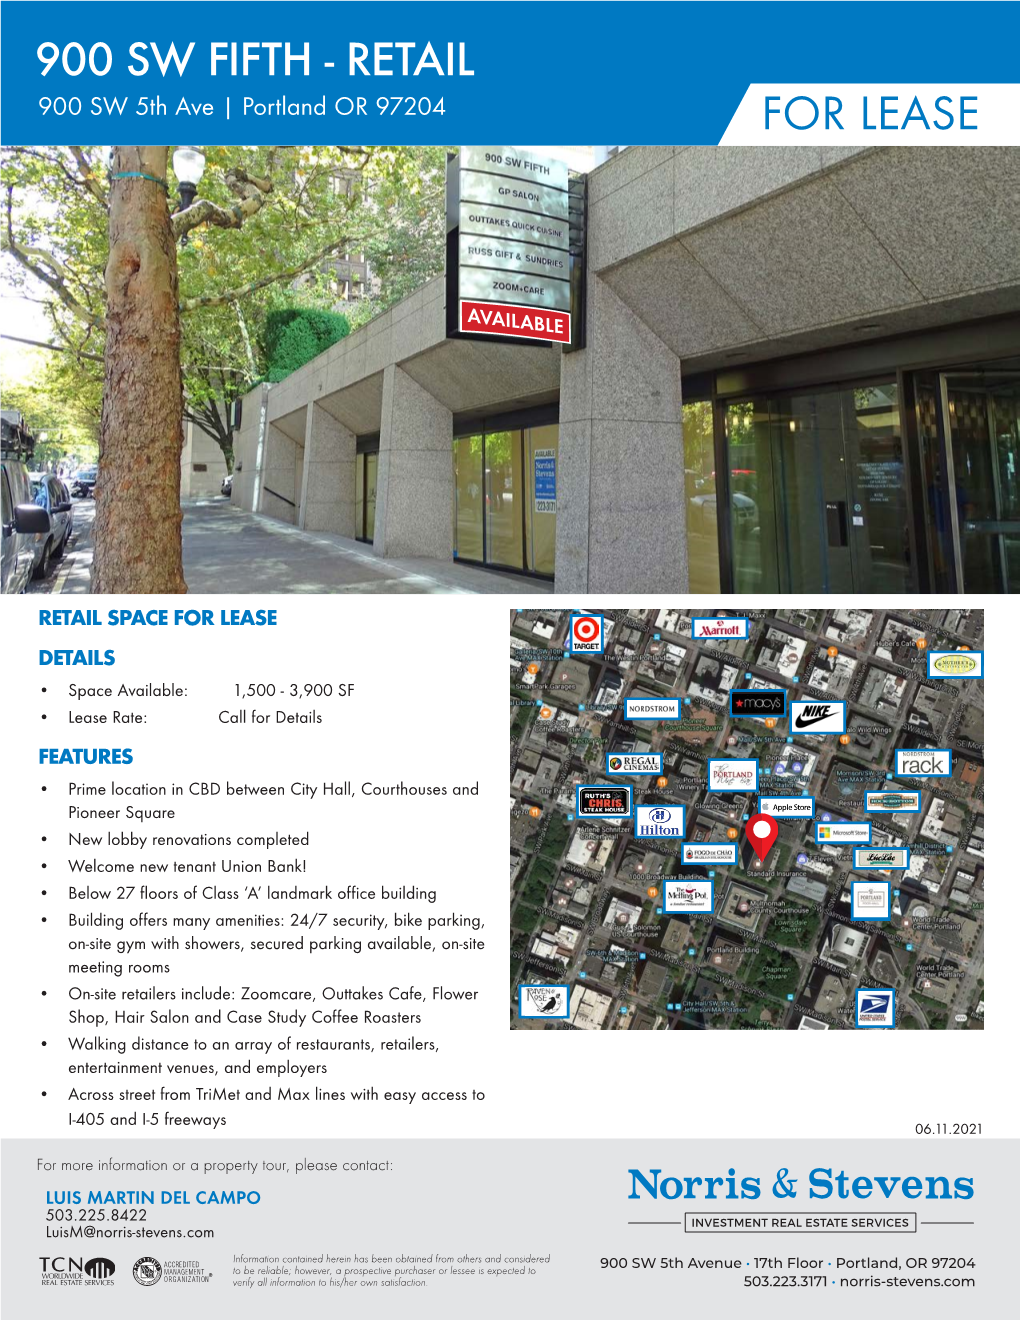 900 SW FIFTH - RETAIL 900 SW 5Th Ave | Portland OR 97204 for LEASE